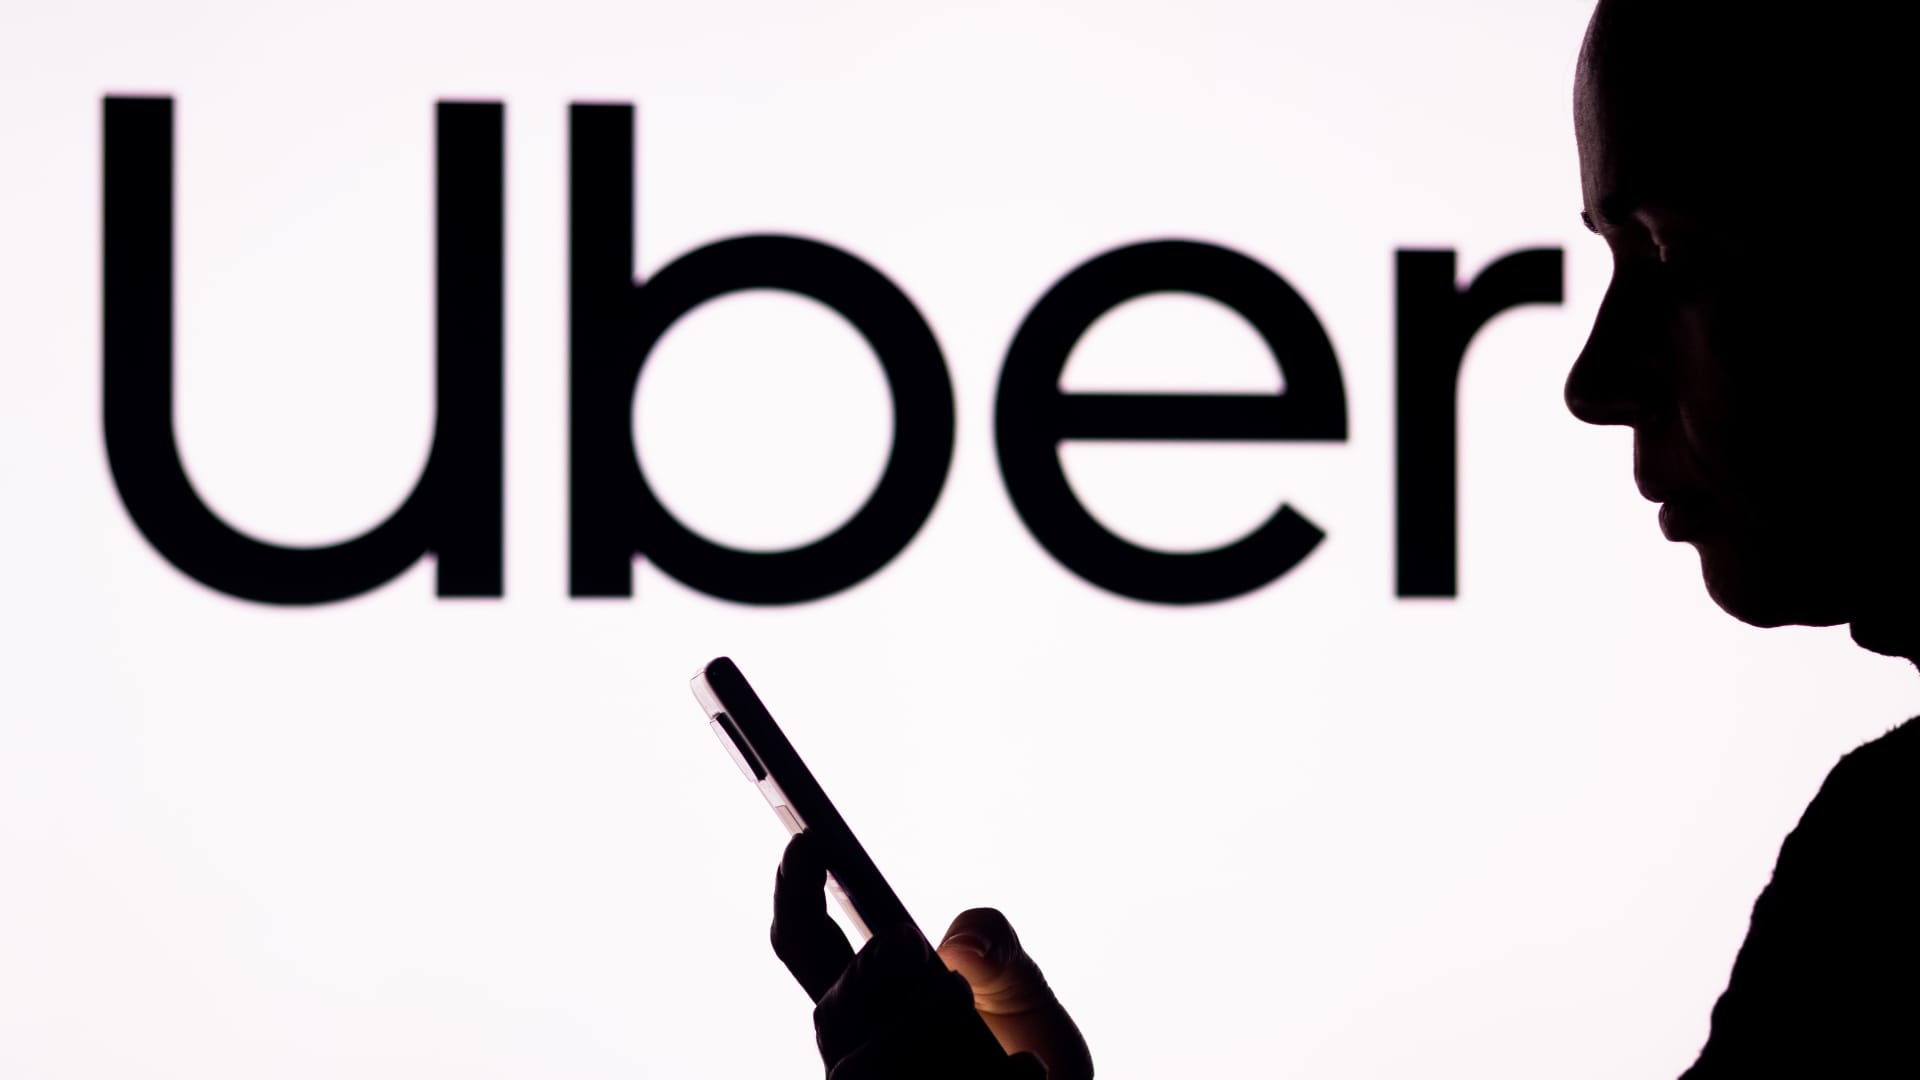 Uber investigates cybersecurity incident after reports of a hack